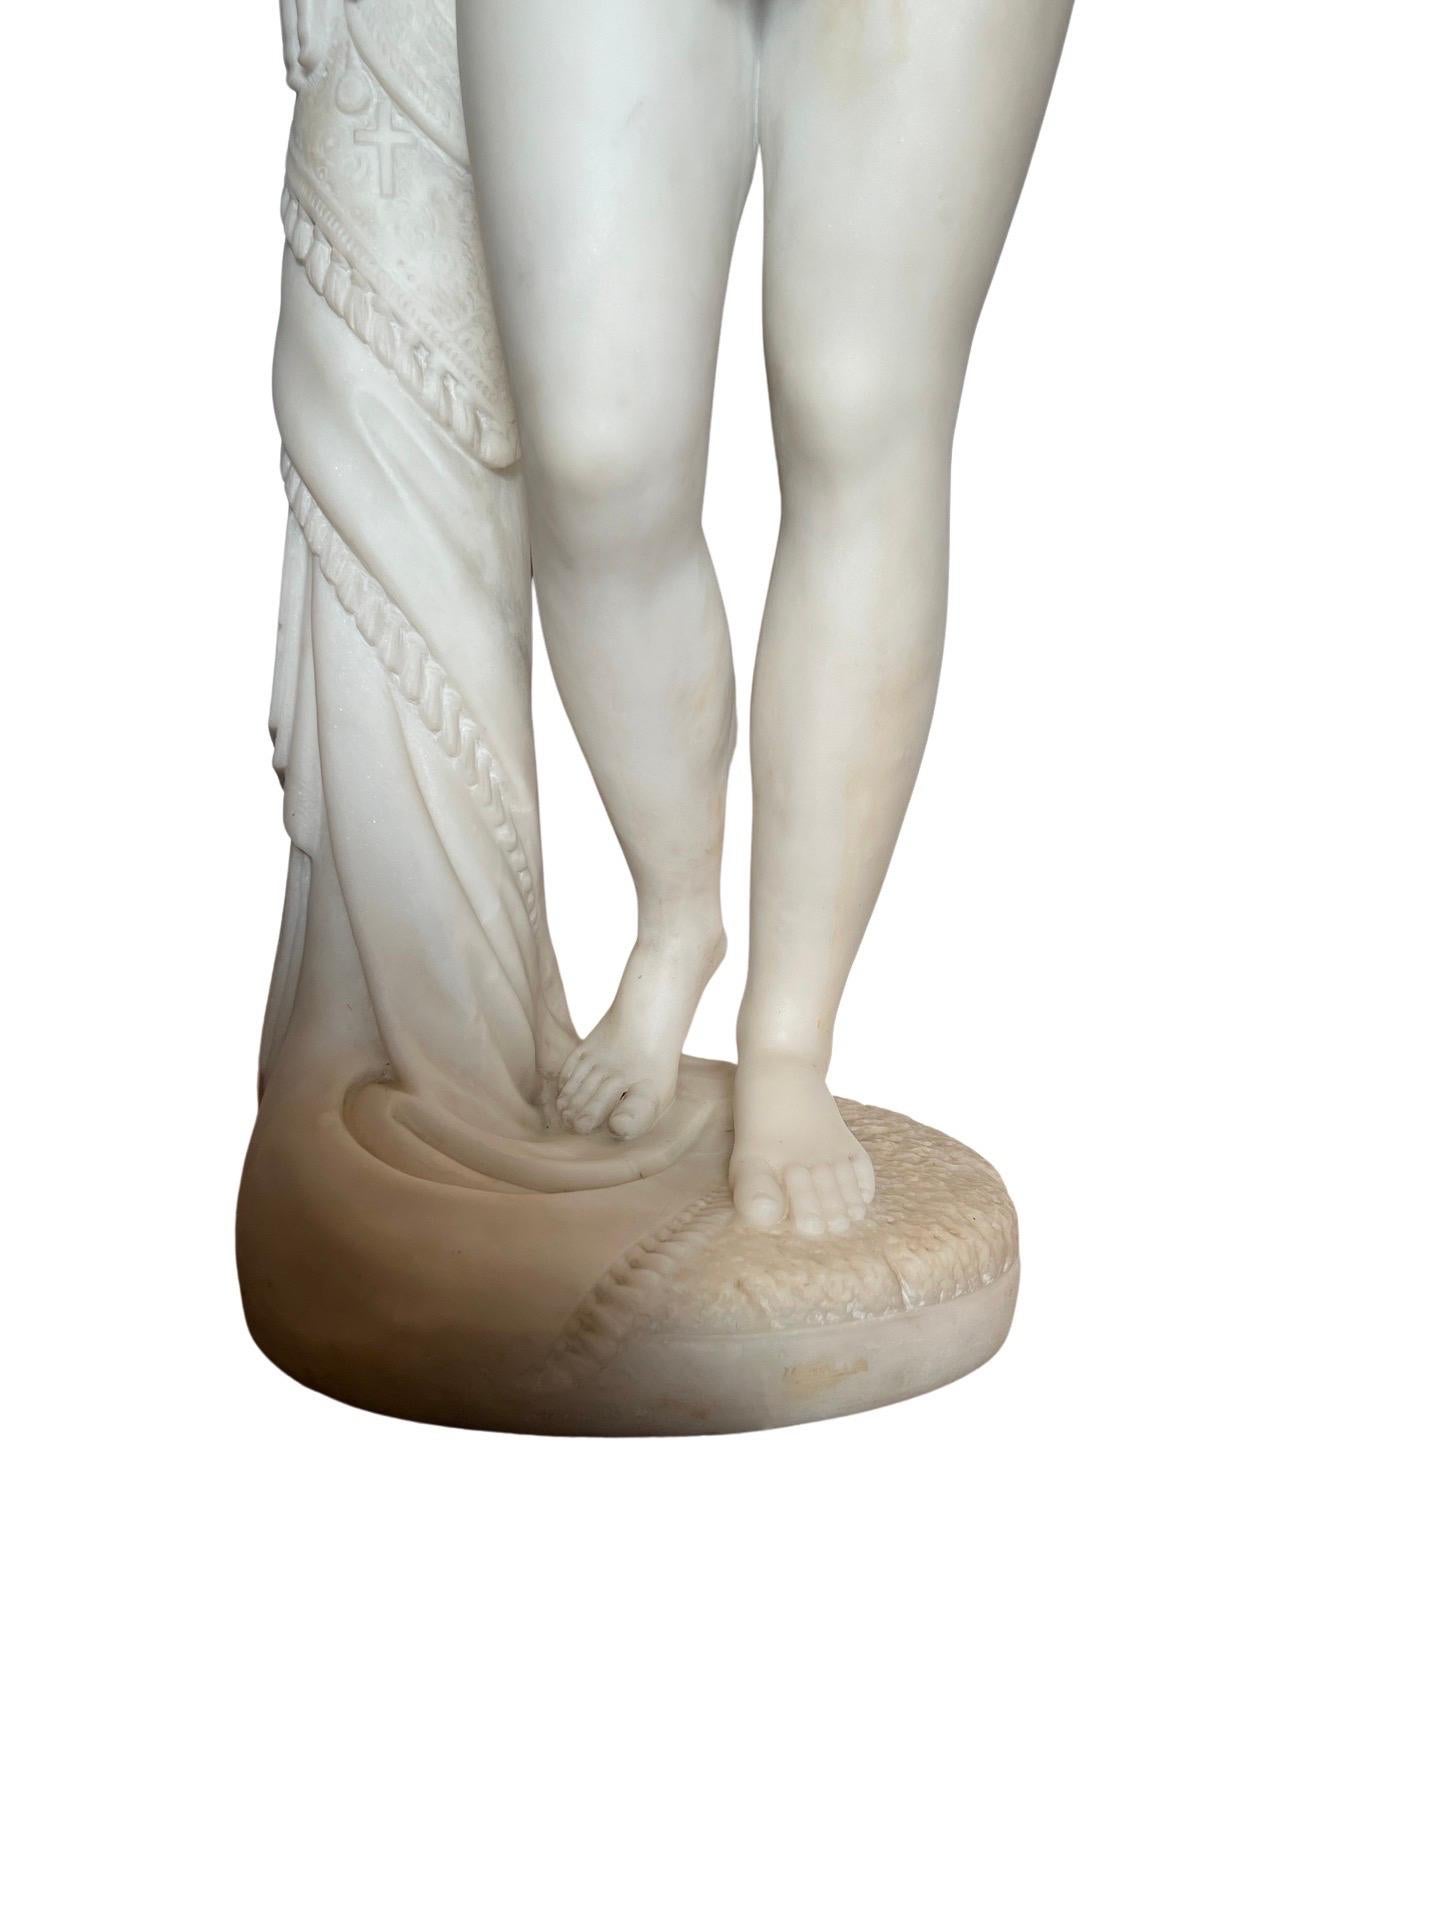 After Hiram Powers (American, 1805-1873), “The Greek Slave”. A finely carved white marble sculpture after the antiquity which is currently held in the collection of Yale University. This model is unsigned but displays excellent quality likely dating